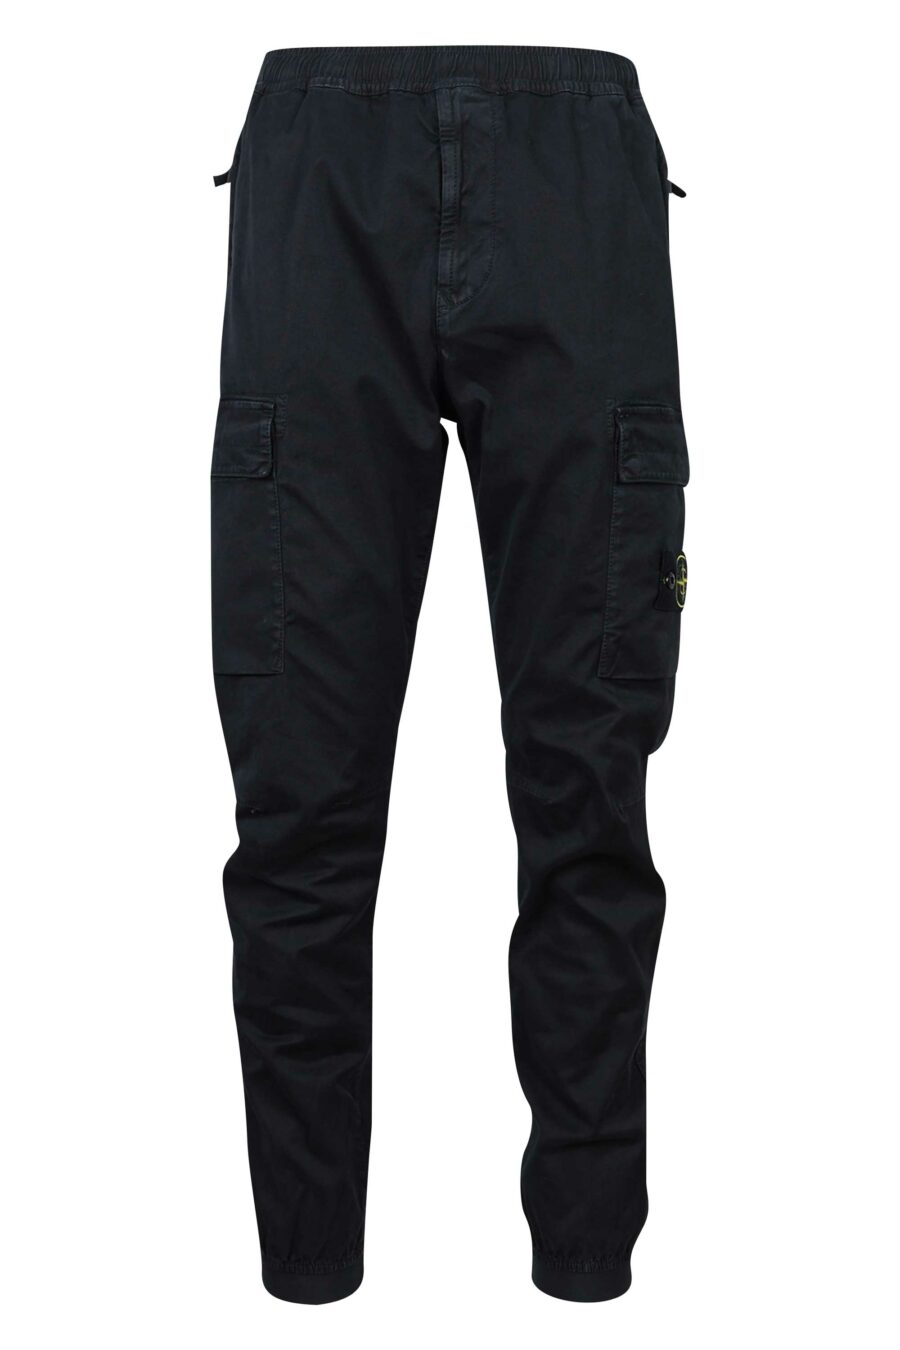 Black trousers with side logo patch - 8052572723292